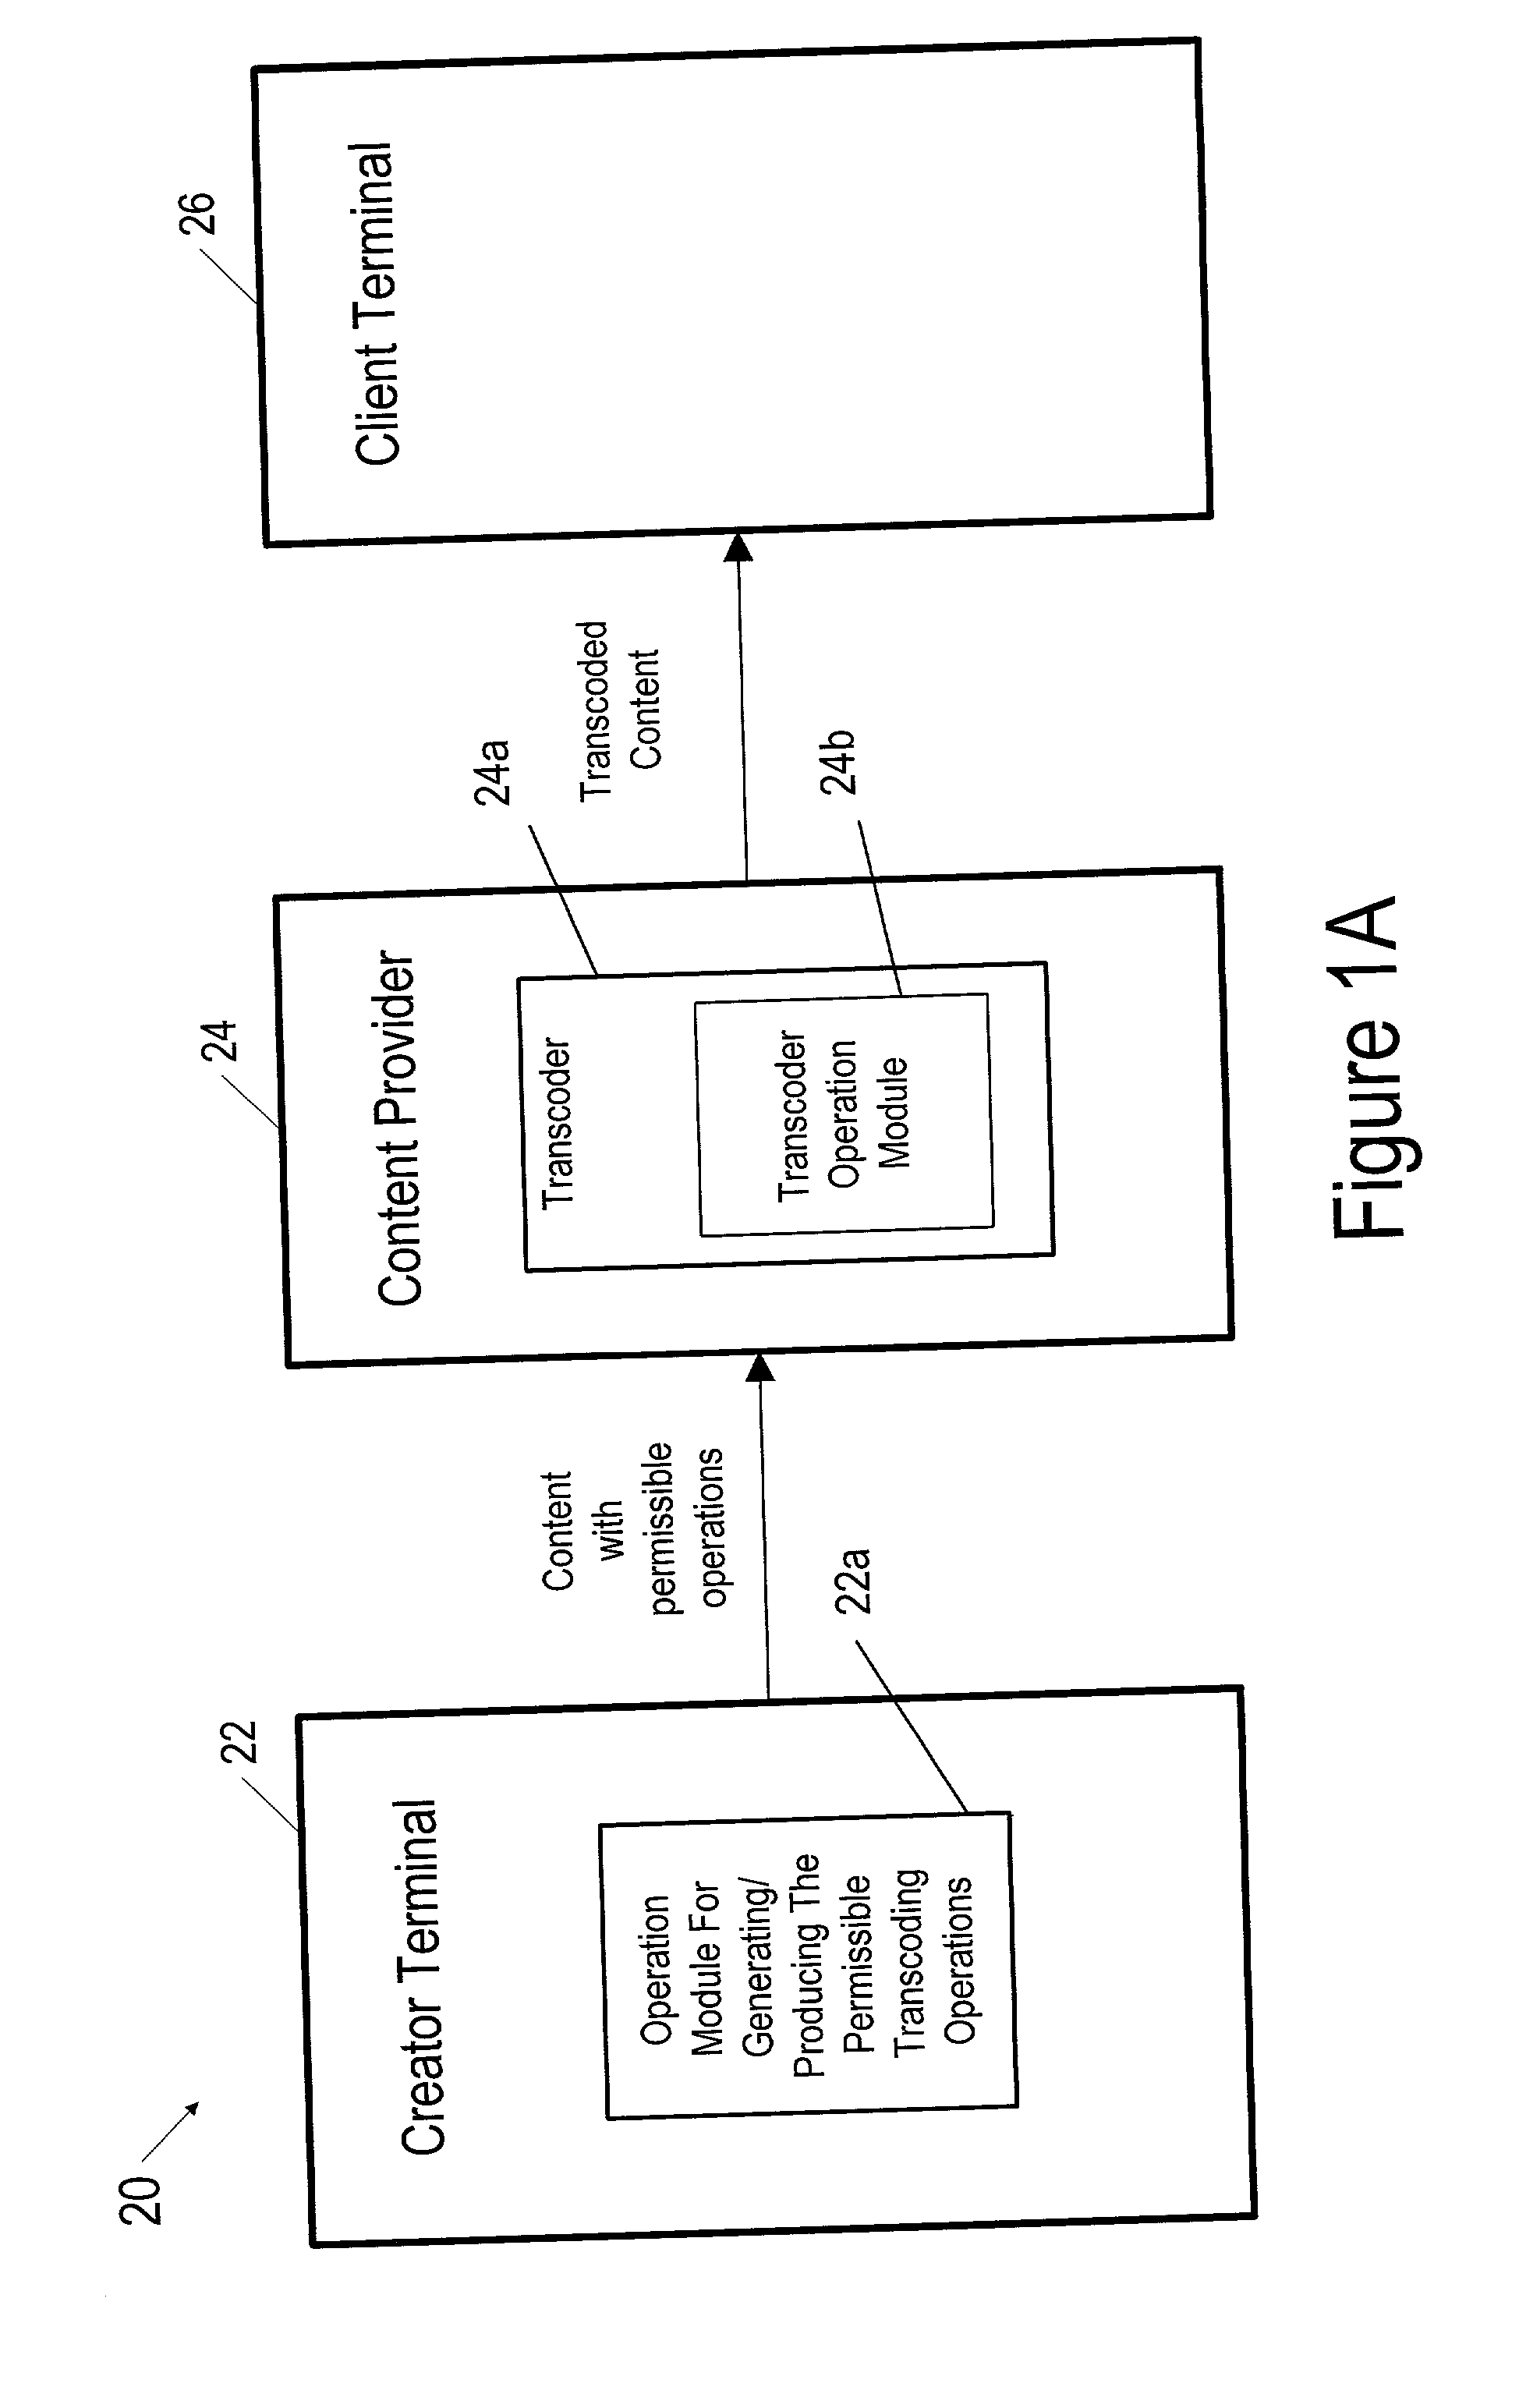 Method and apparatus for transcoding content with permissible operations authorized by content creator